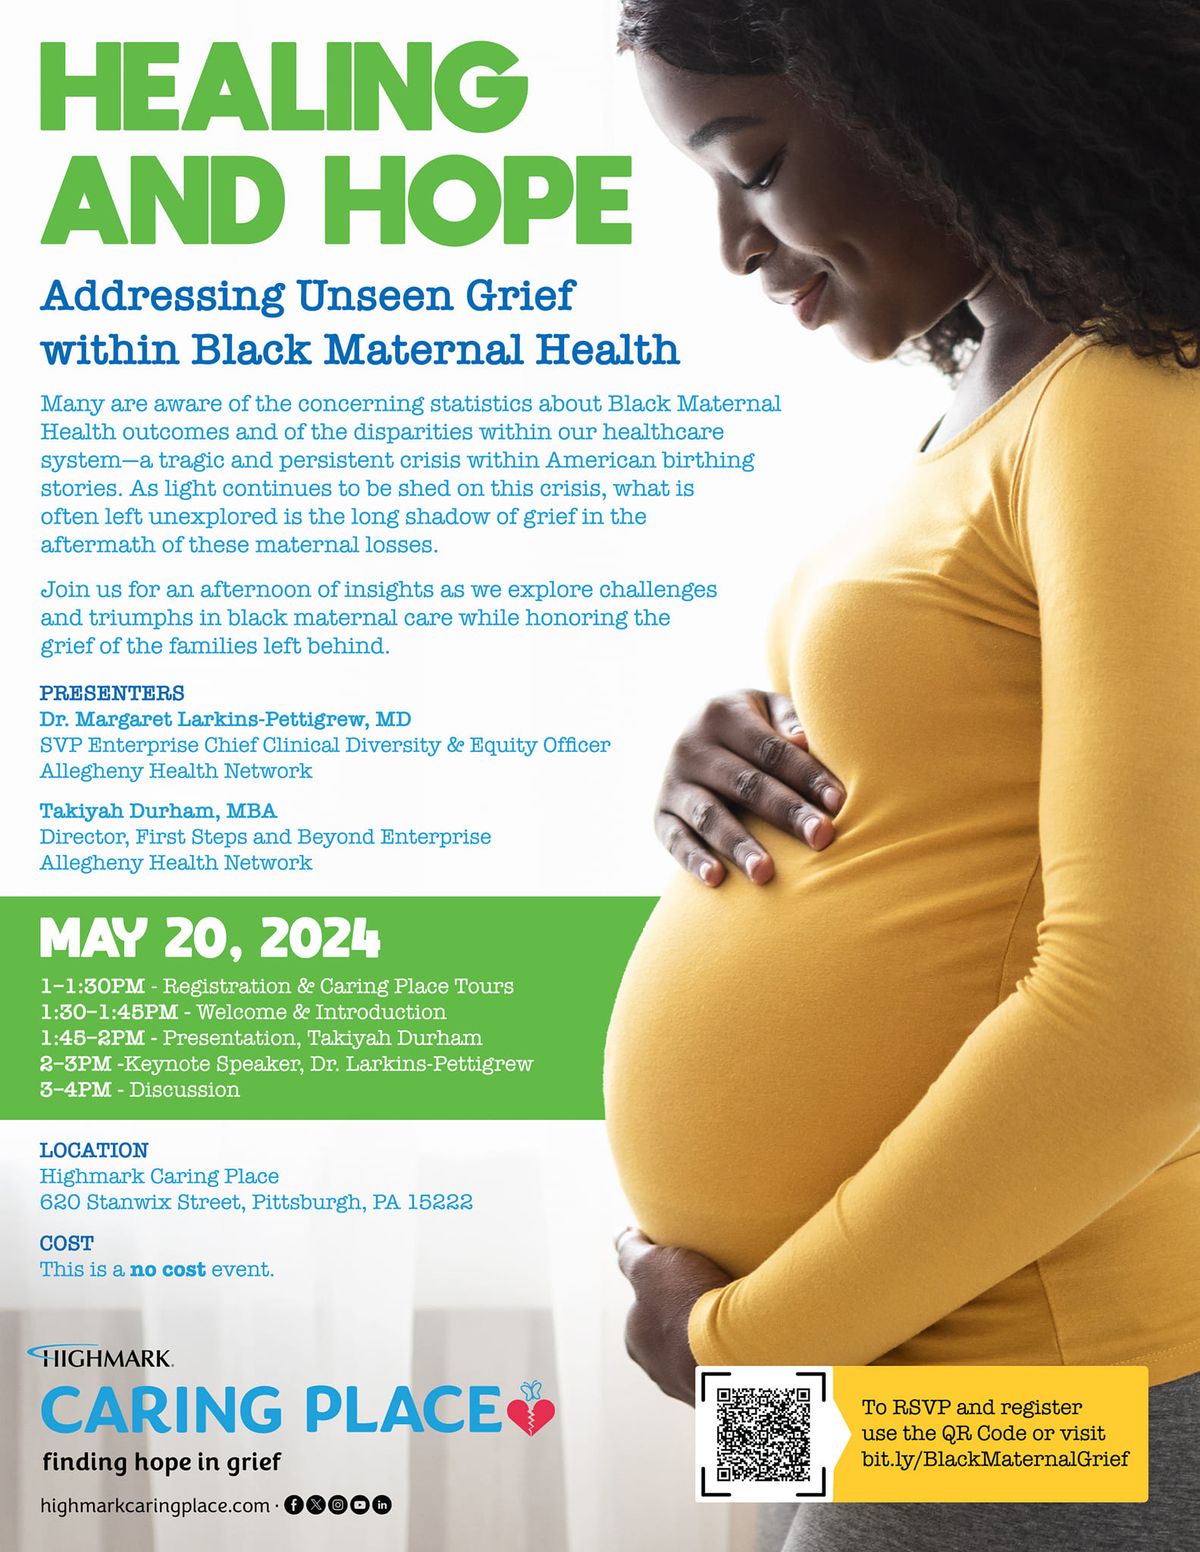 Healing & Hope: Addressing Unseen Grief within Black Maternal Health